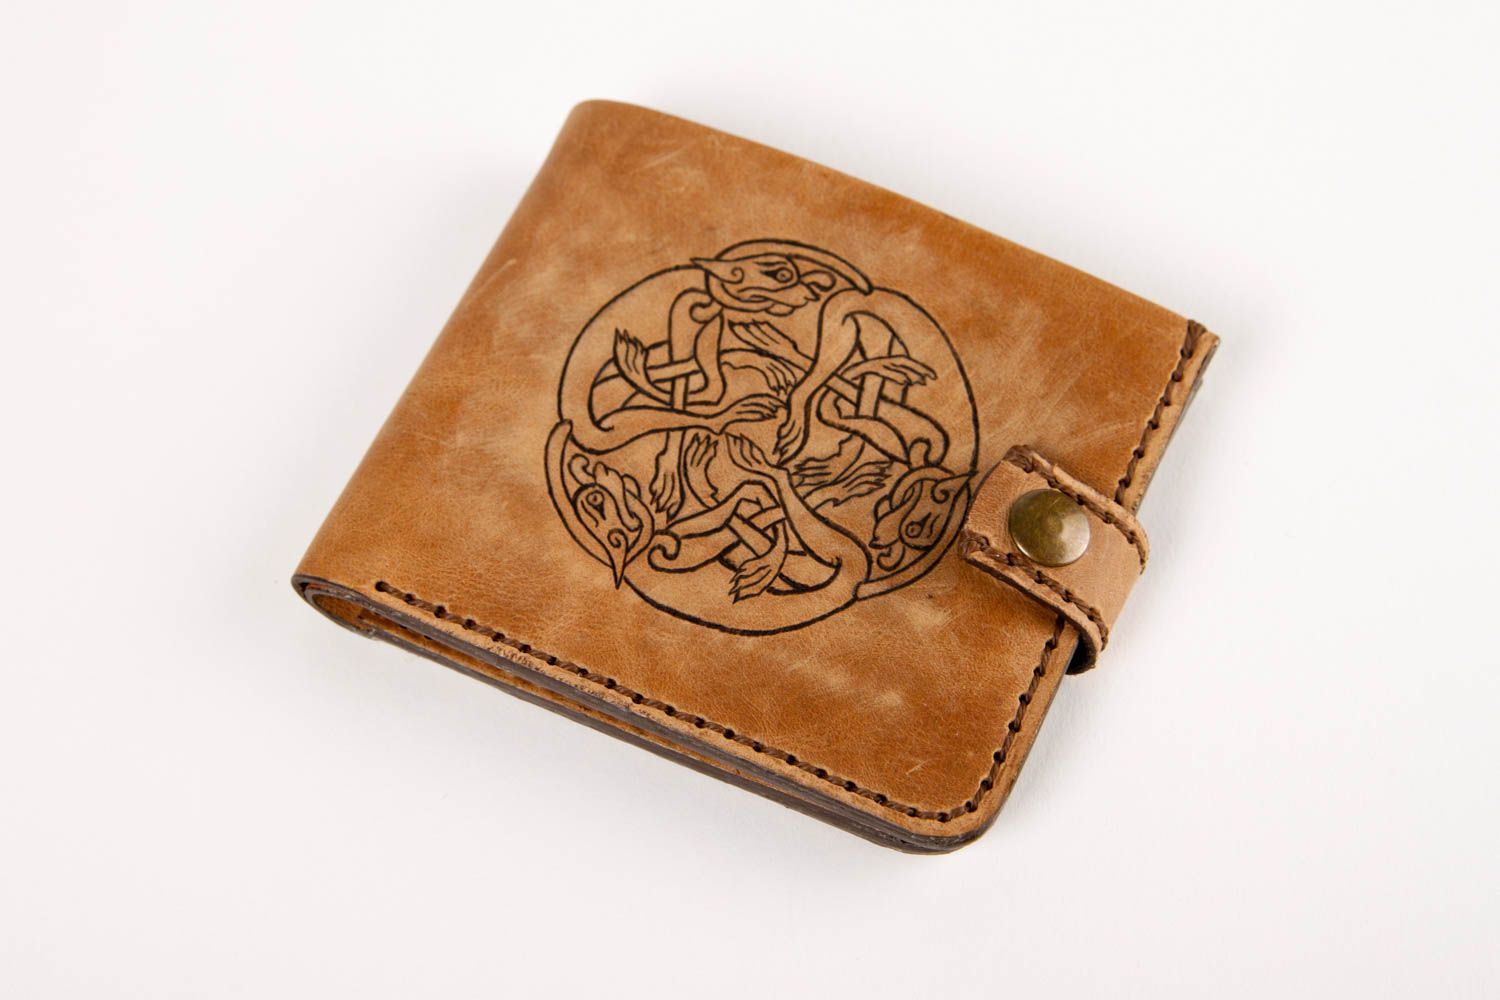 Unusual handmade leather wallet fashion trends leather goods small gifts photo 3